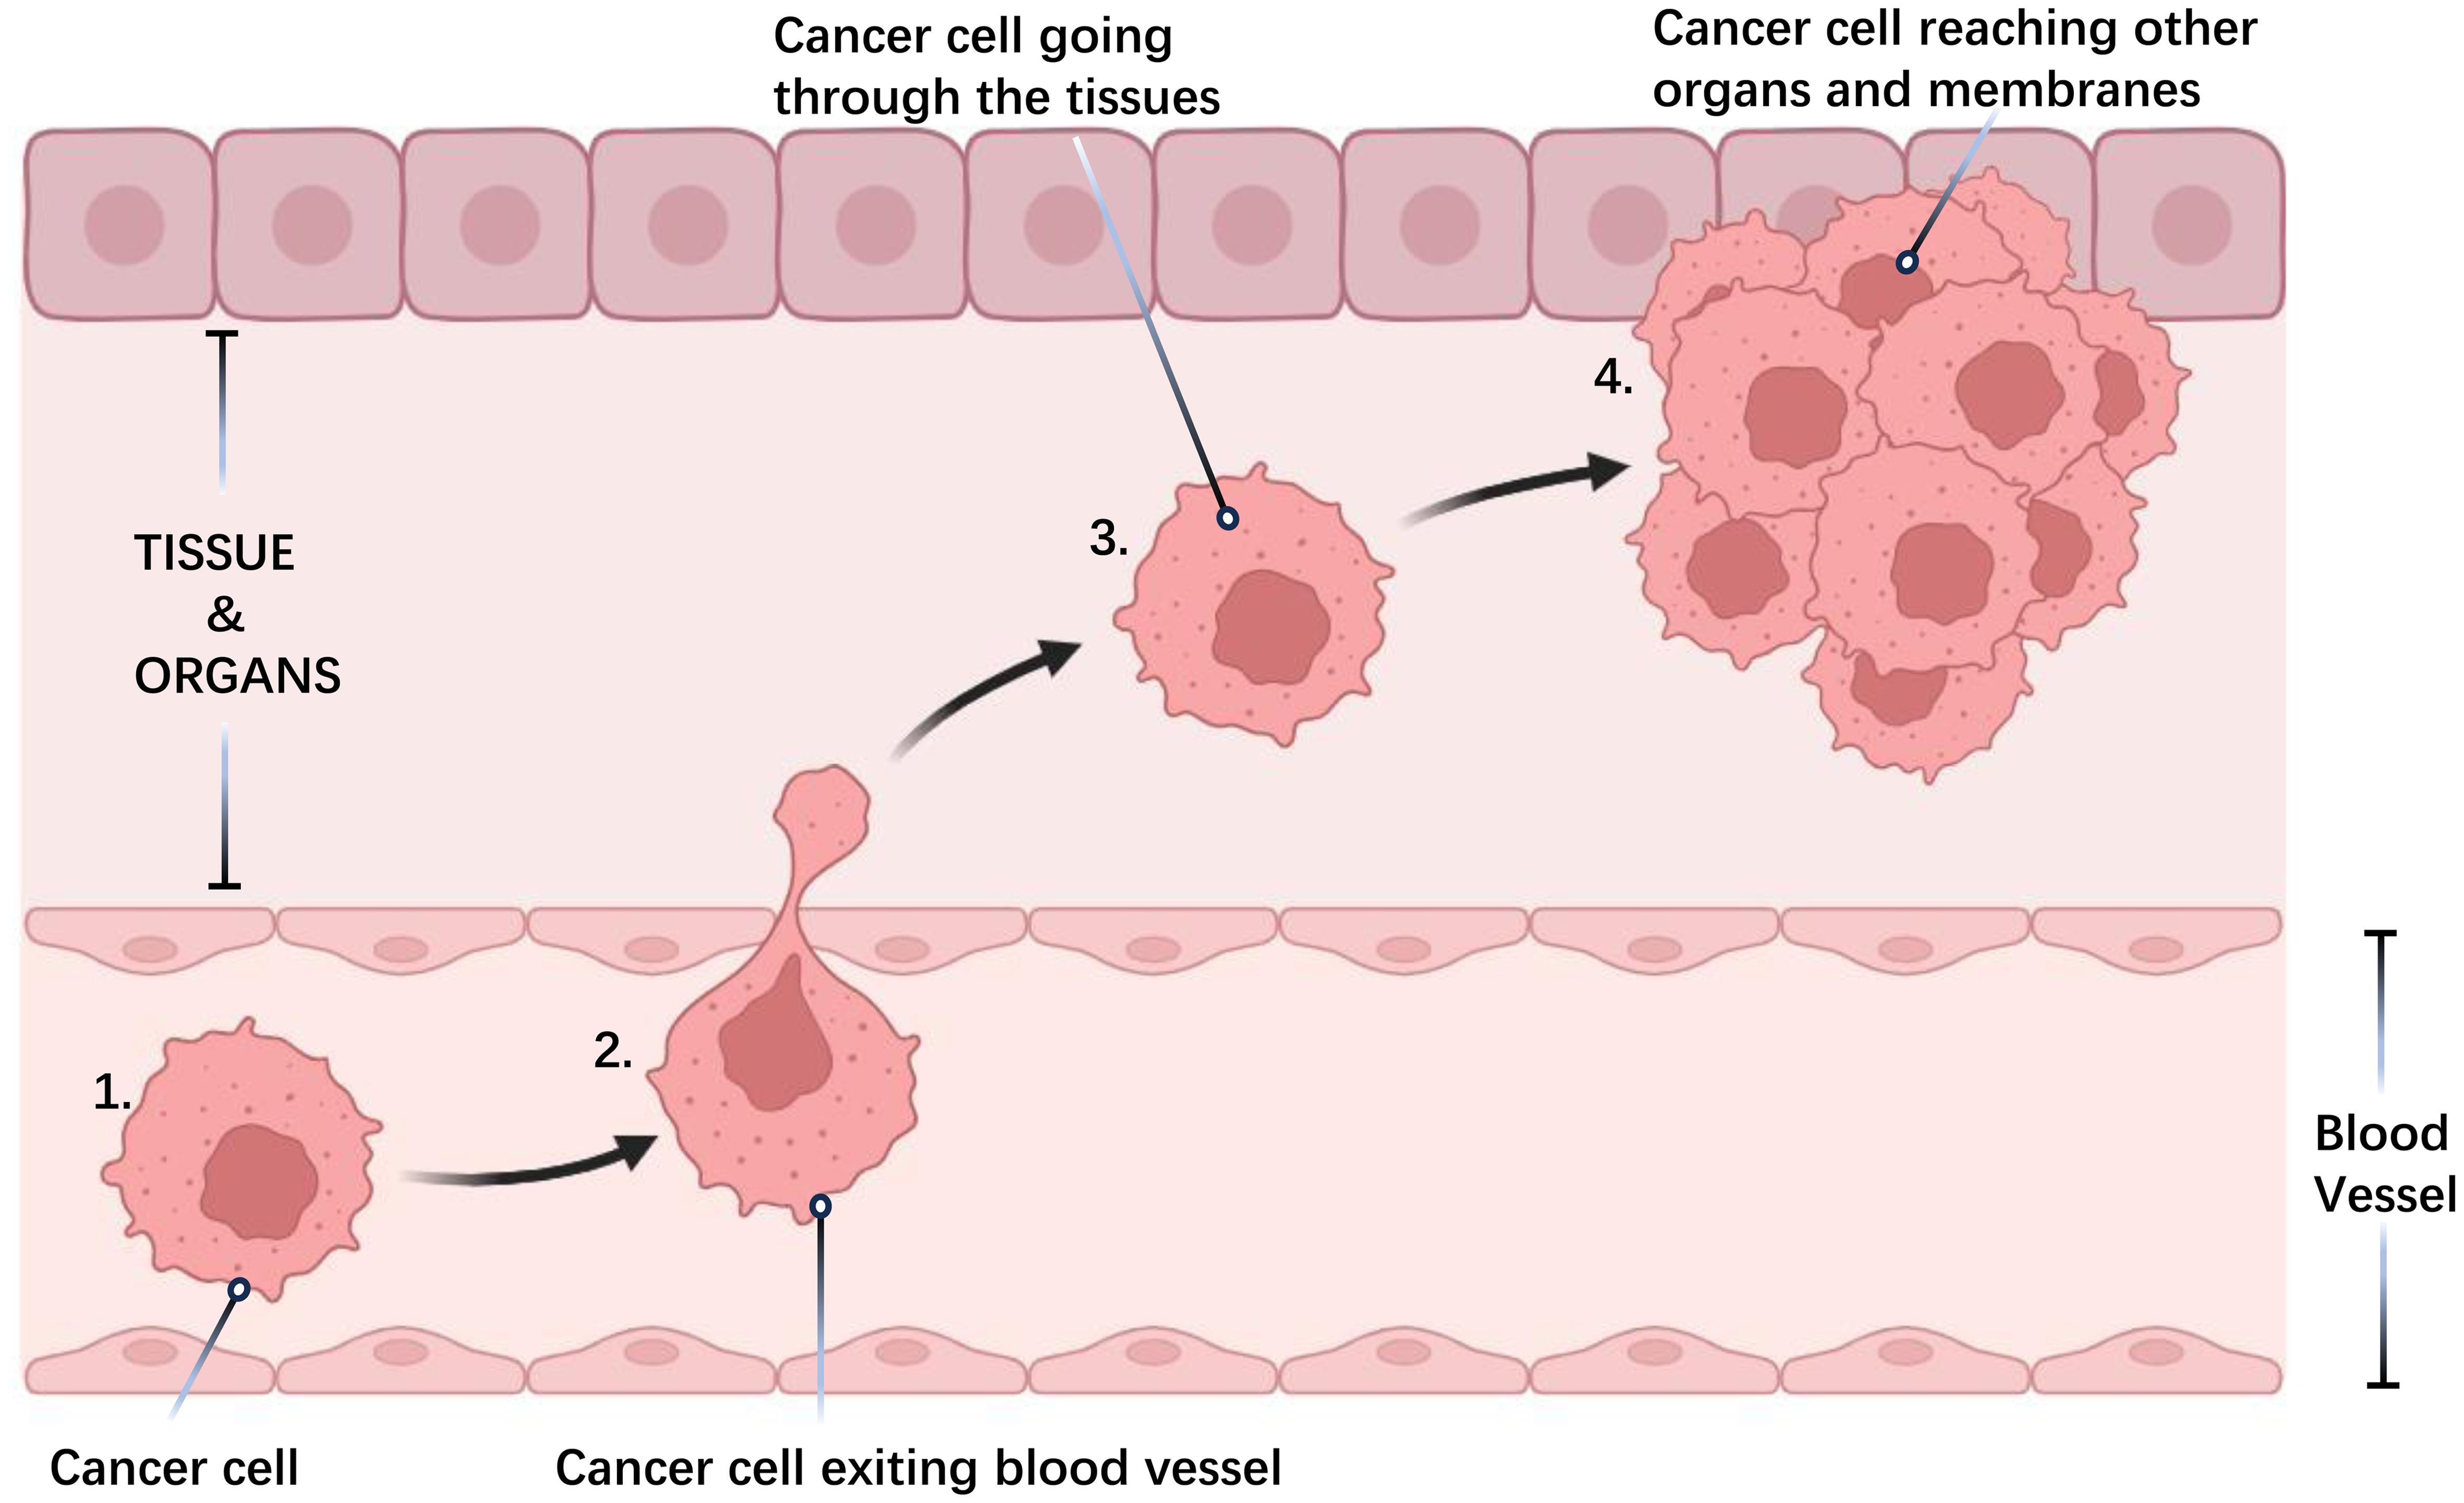 Cancer cells enter the metastasis site from the blood vessel.